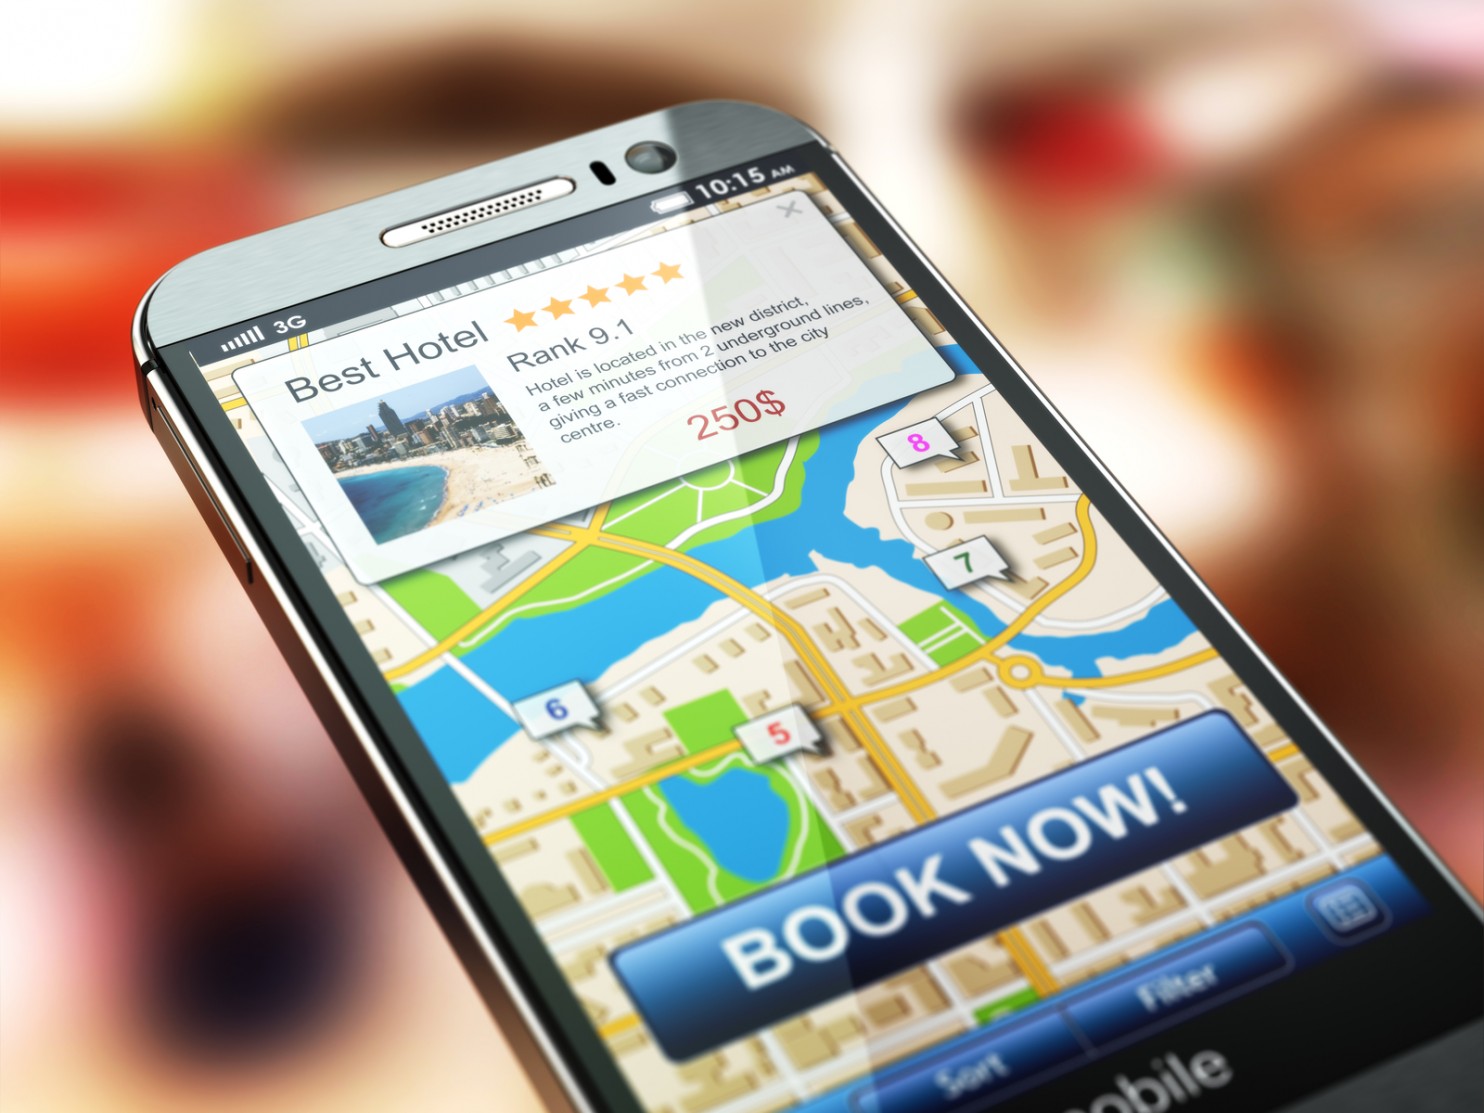 Online Travel Agents are dimmingt results on hotel searches